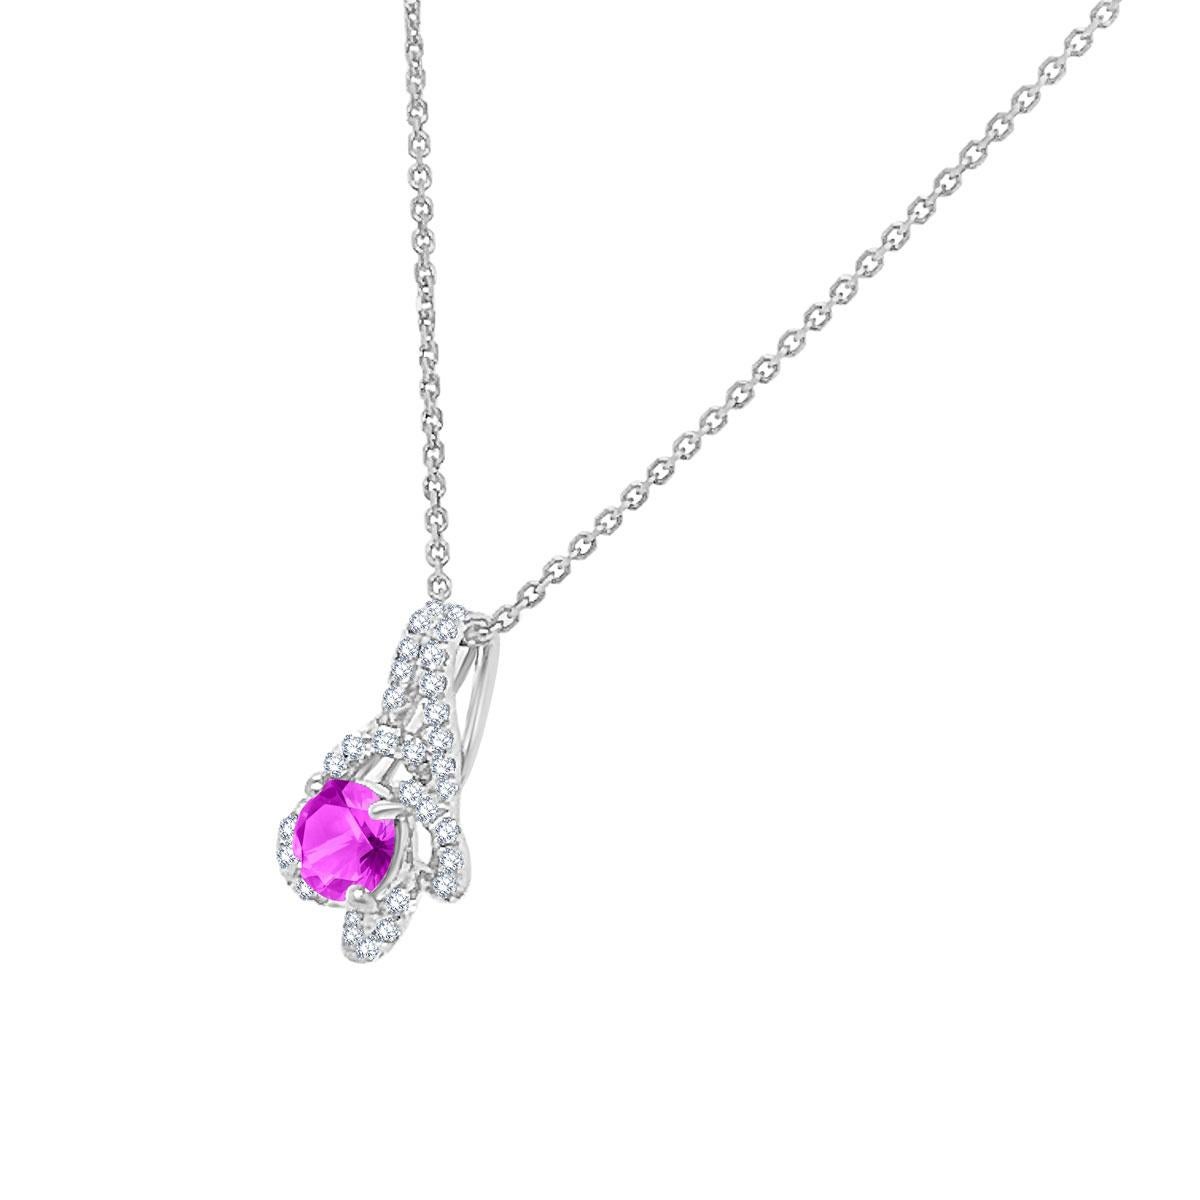 This Floral designed pendant features a 0.37 carat round pink Sapphire surrounded by 0.16 total carat weight of round brilliant diamonds set in 18k white gold.

Product details: 

Center Gemstone Type: Pink Sapphire
Center Gemstone Carat Weight: